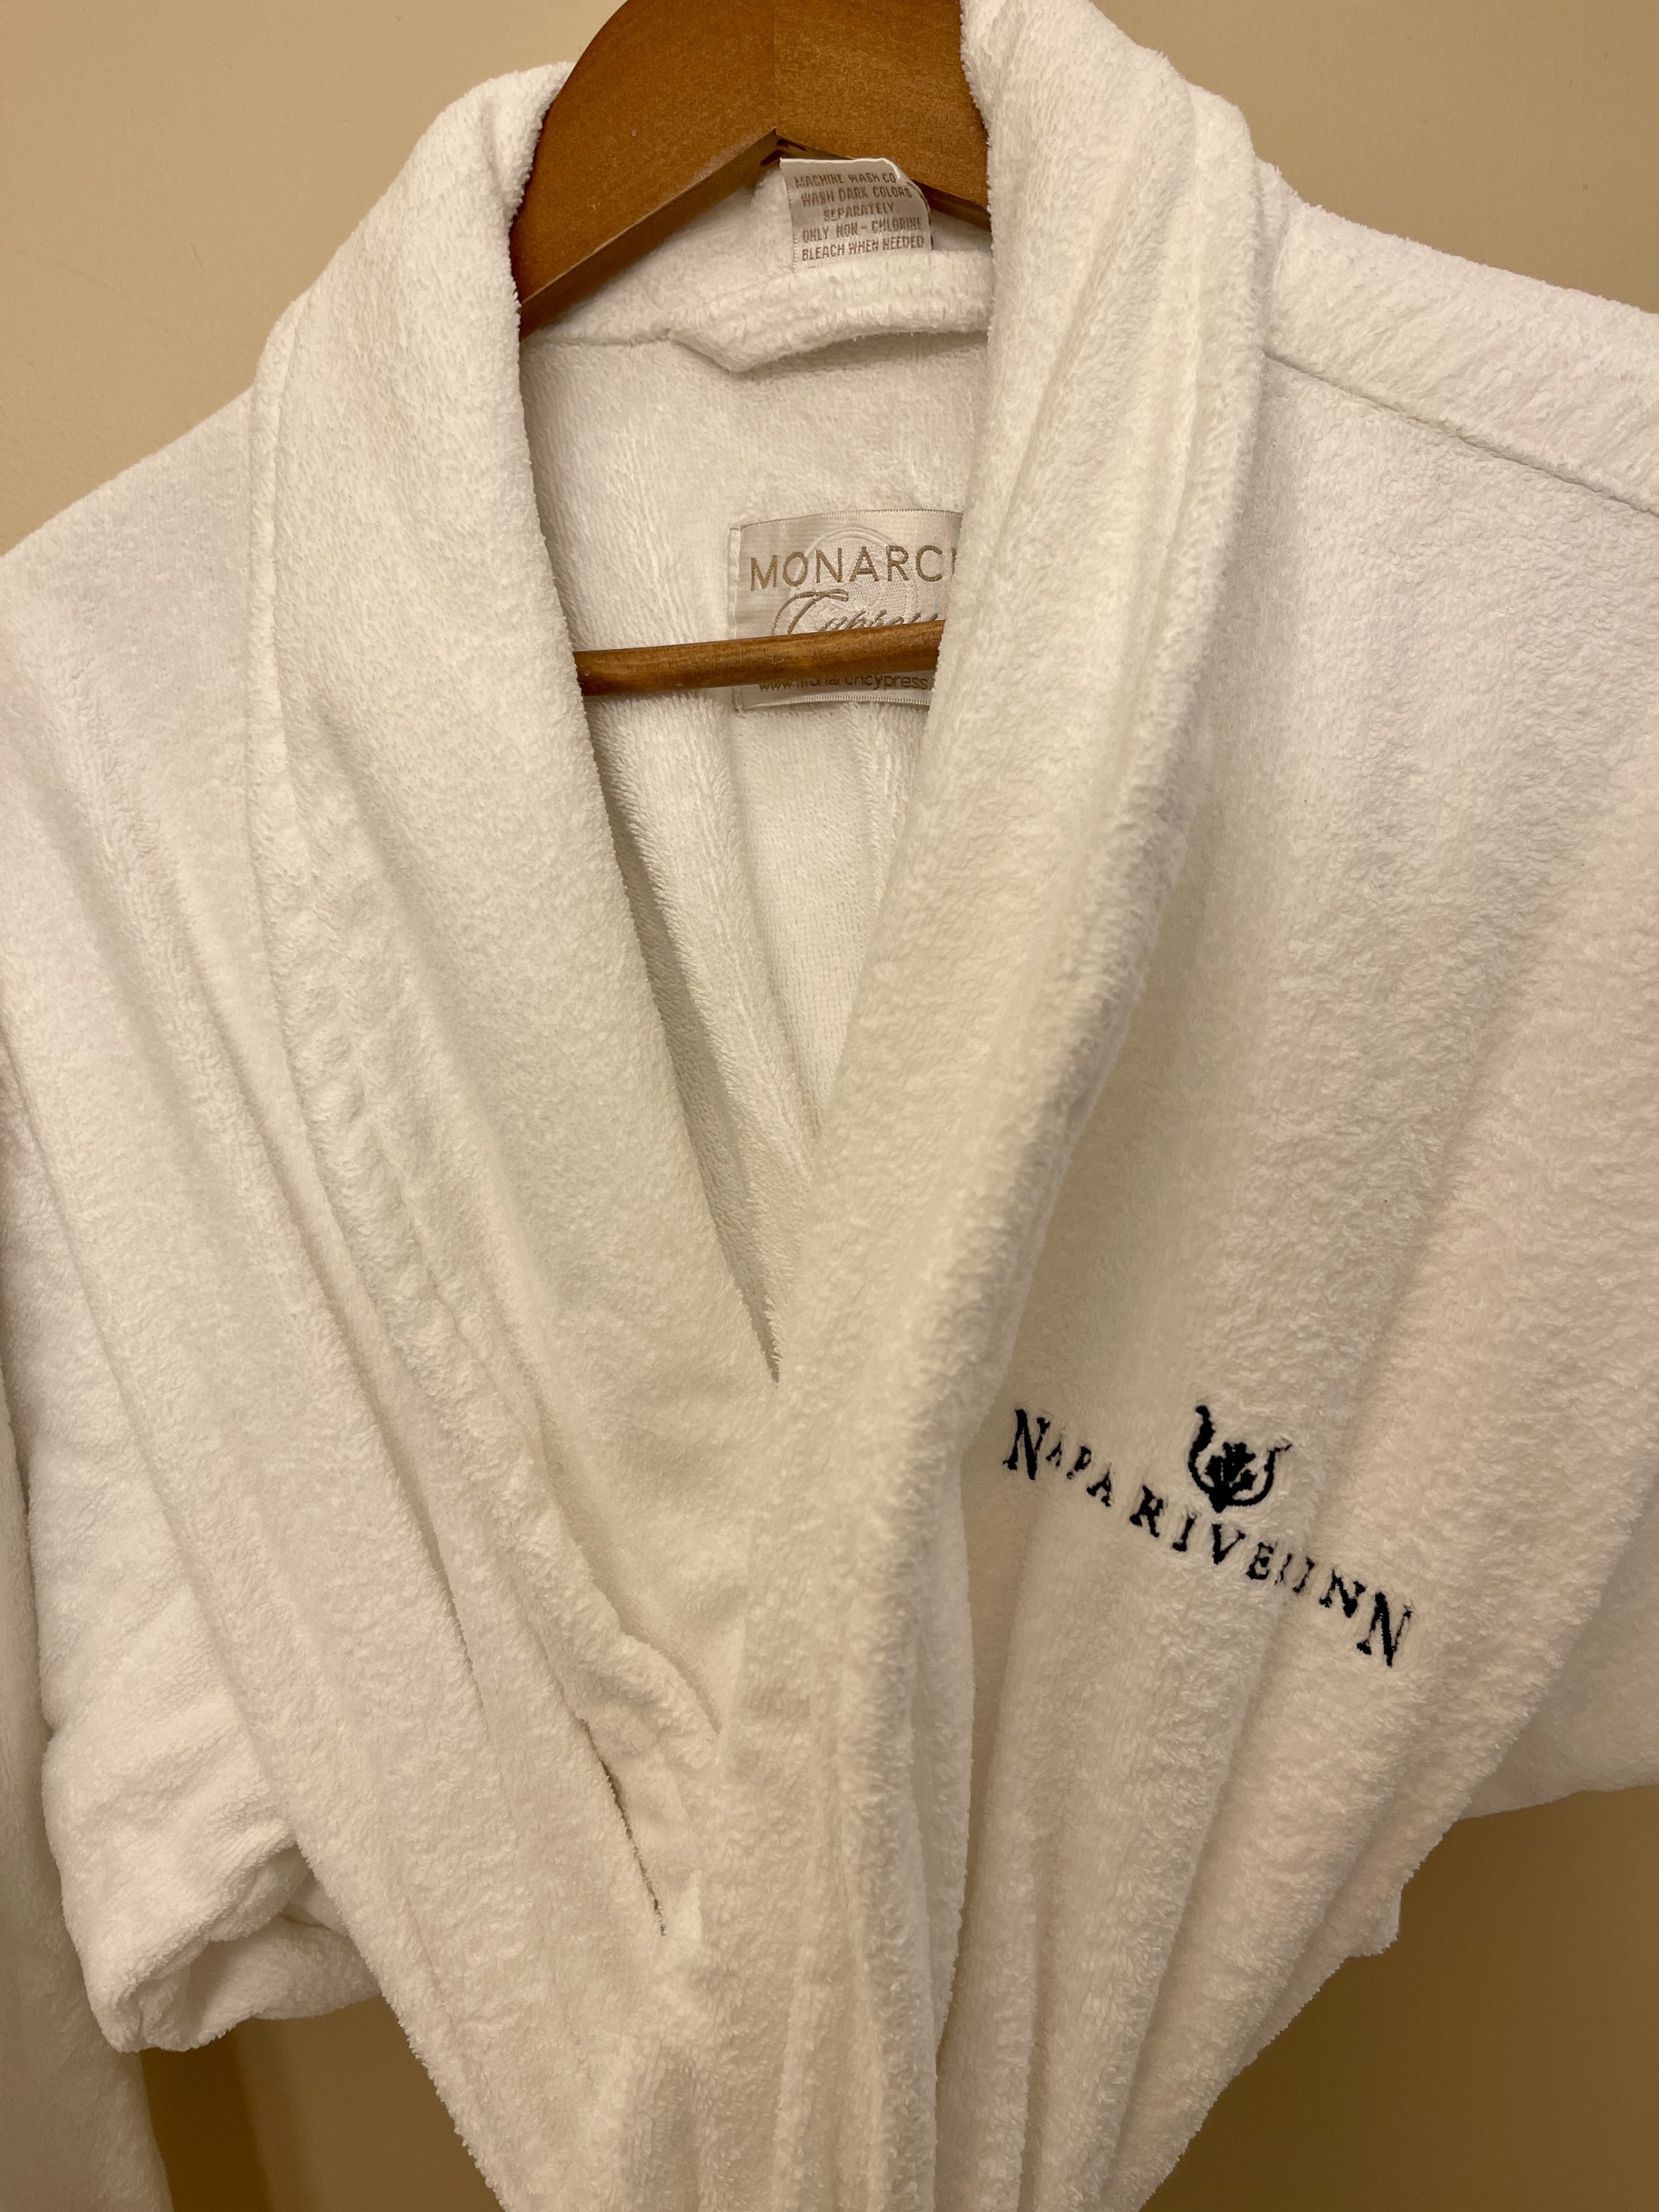 Luxury spa downtown napa - this Napa River Inn Review will tell you all about one of the best downtown Napa hotels. Napa River Inn is a luxurious, boutique hotel with amazing river views and guest rooms.